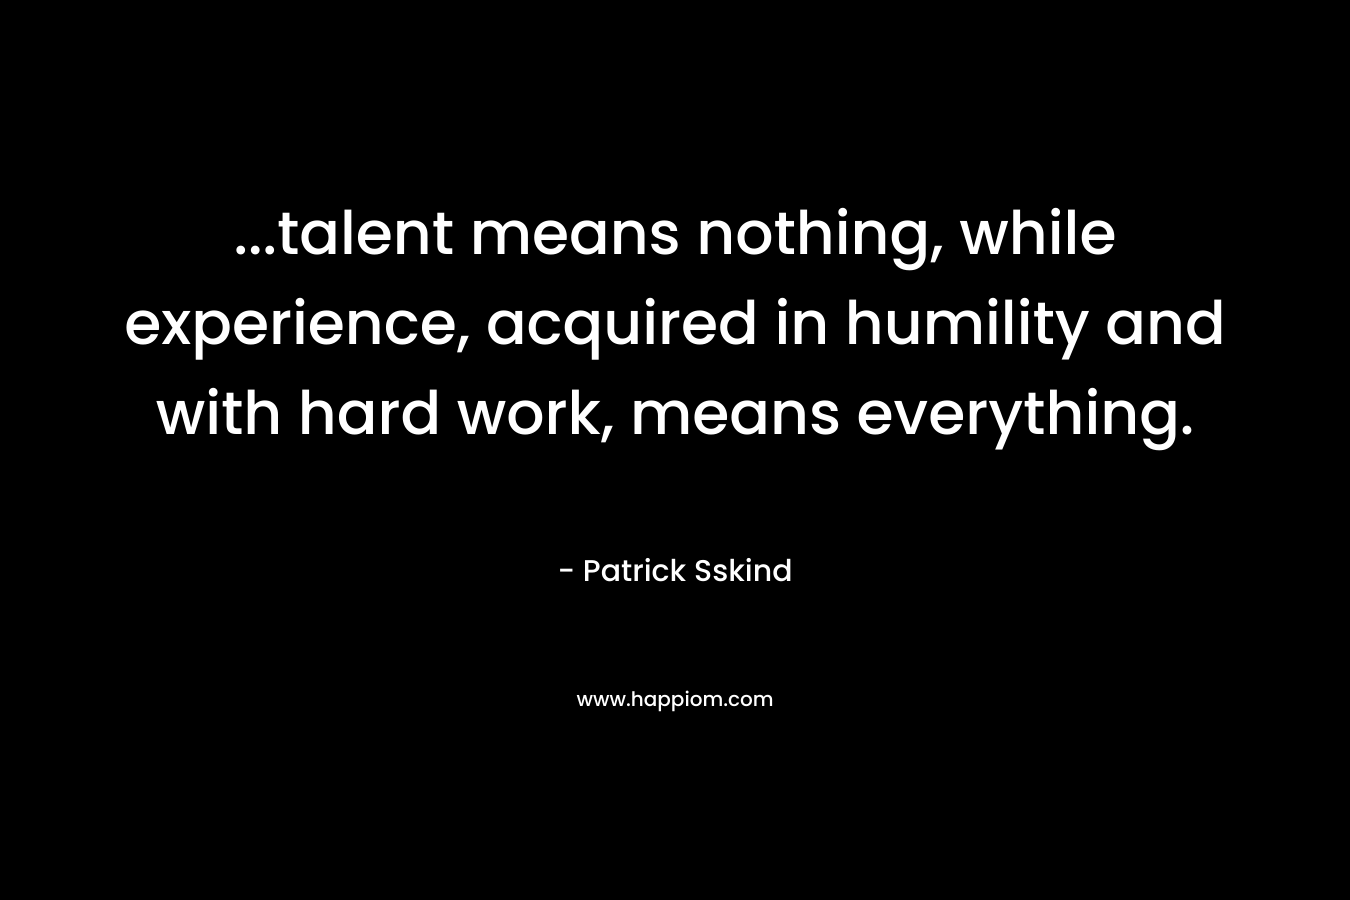 ...talent means nothing, while experience, acquired in humility and with hard work, means everything.